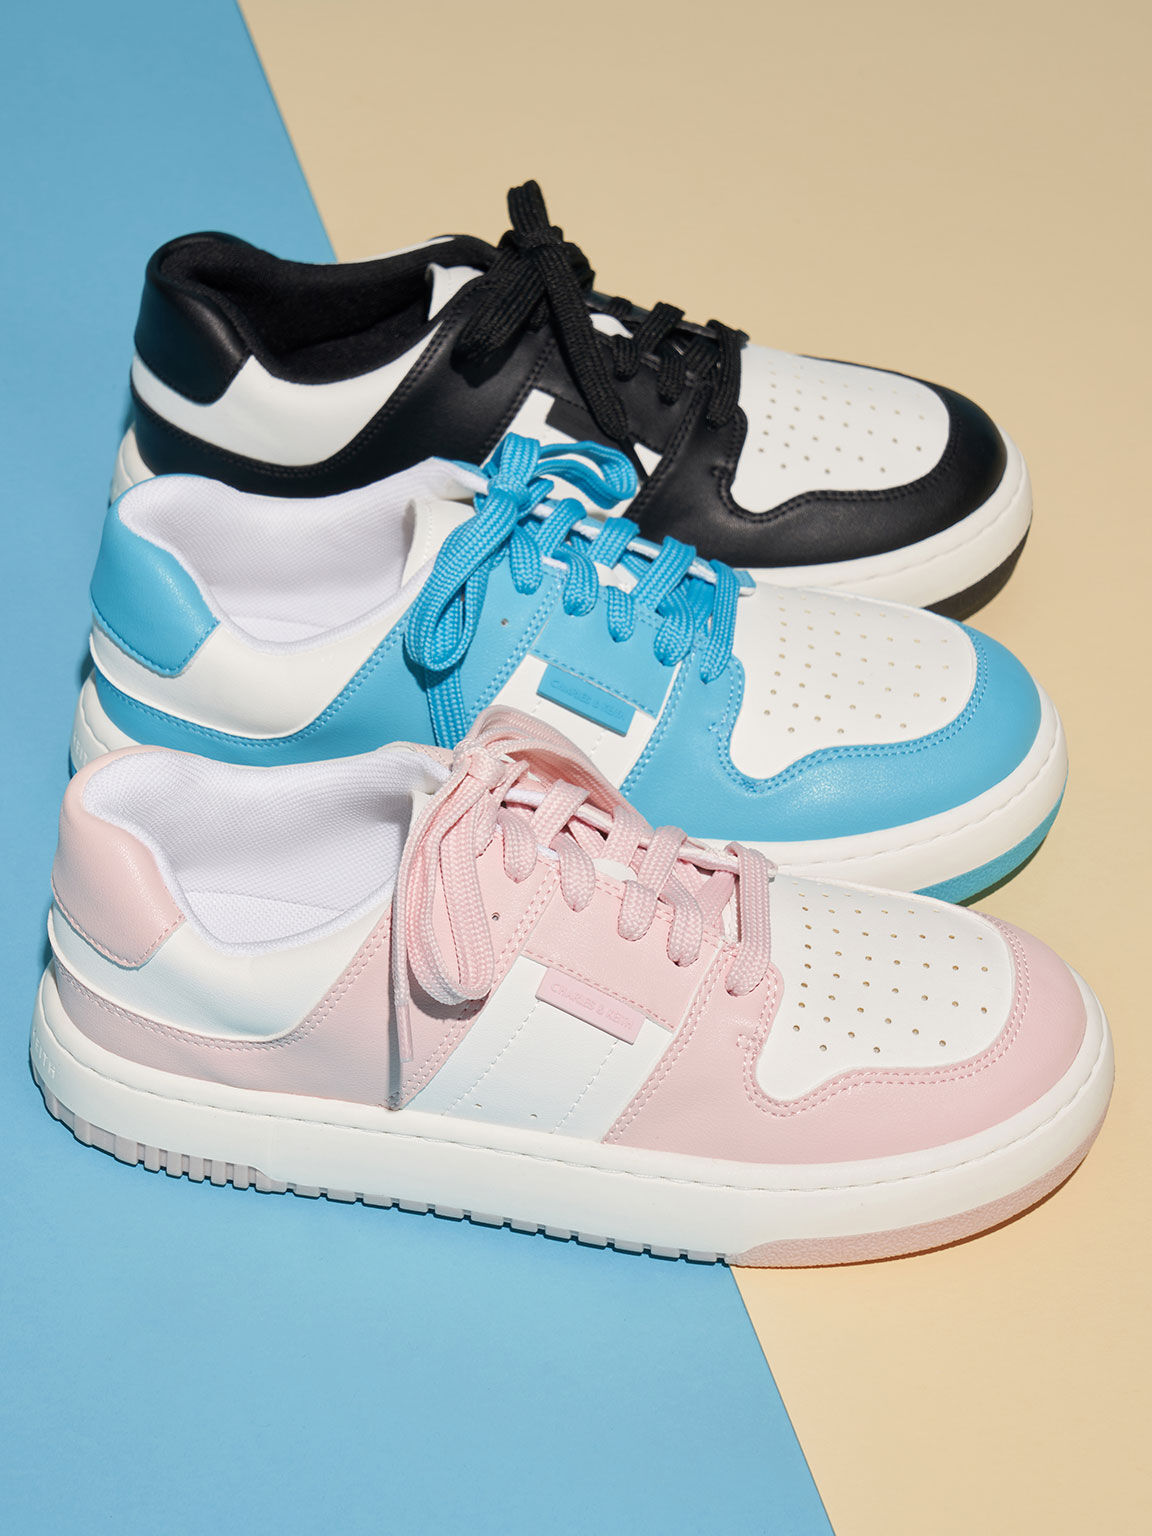 Two-Tone Low-Top Sneakers, Pink, hi-res